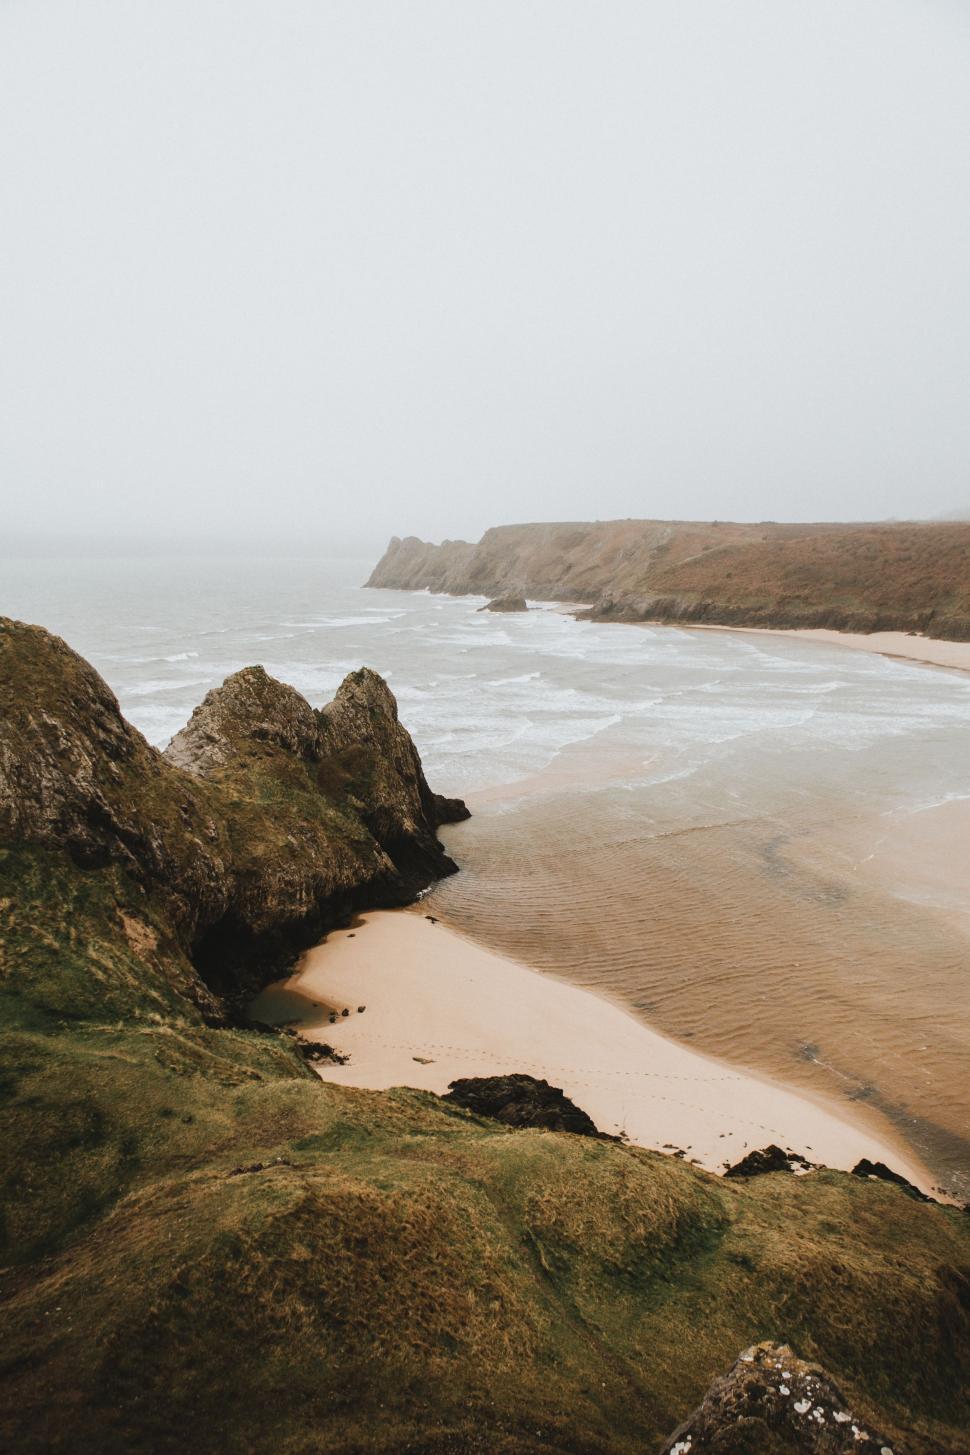 Free Image of Foggy Day at a Sandy Beach by the Ocean 